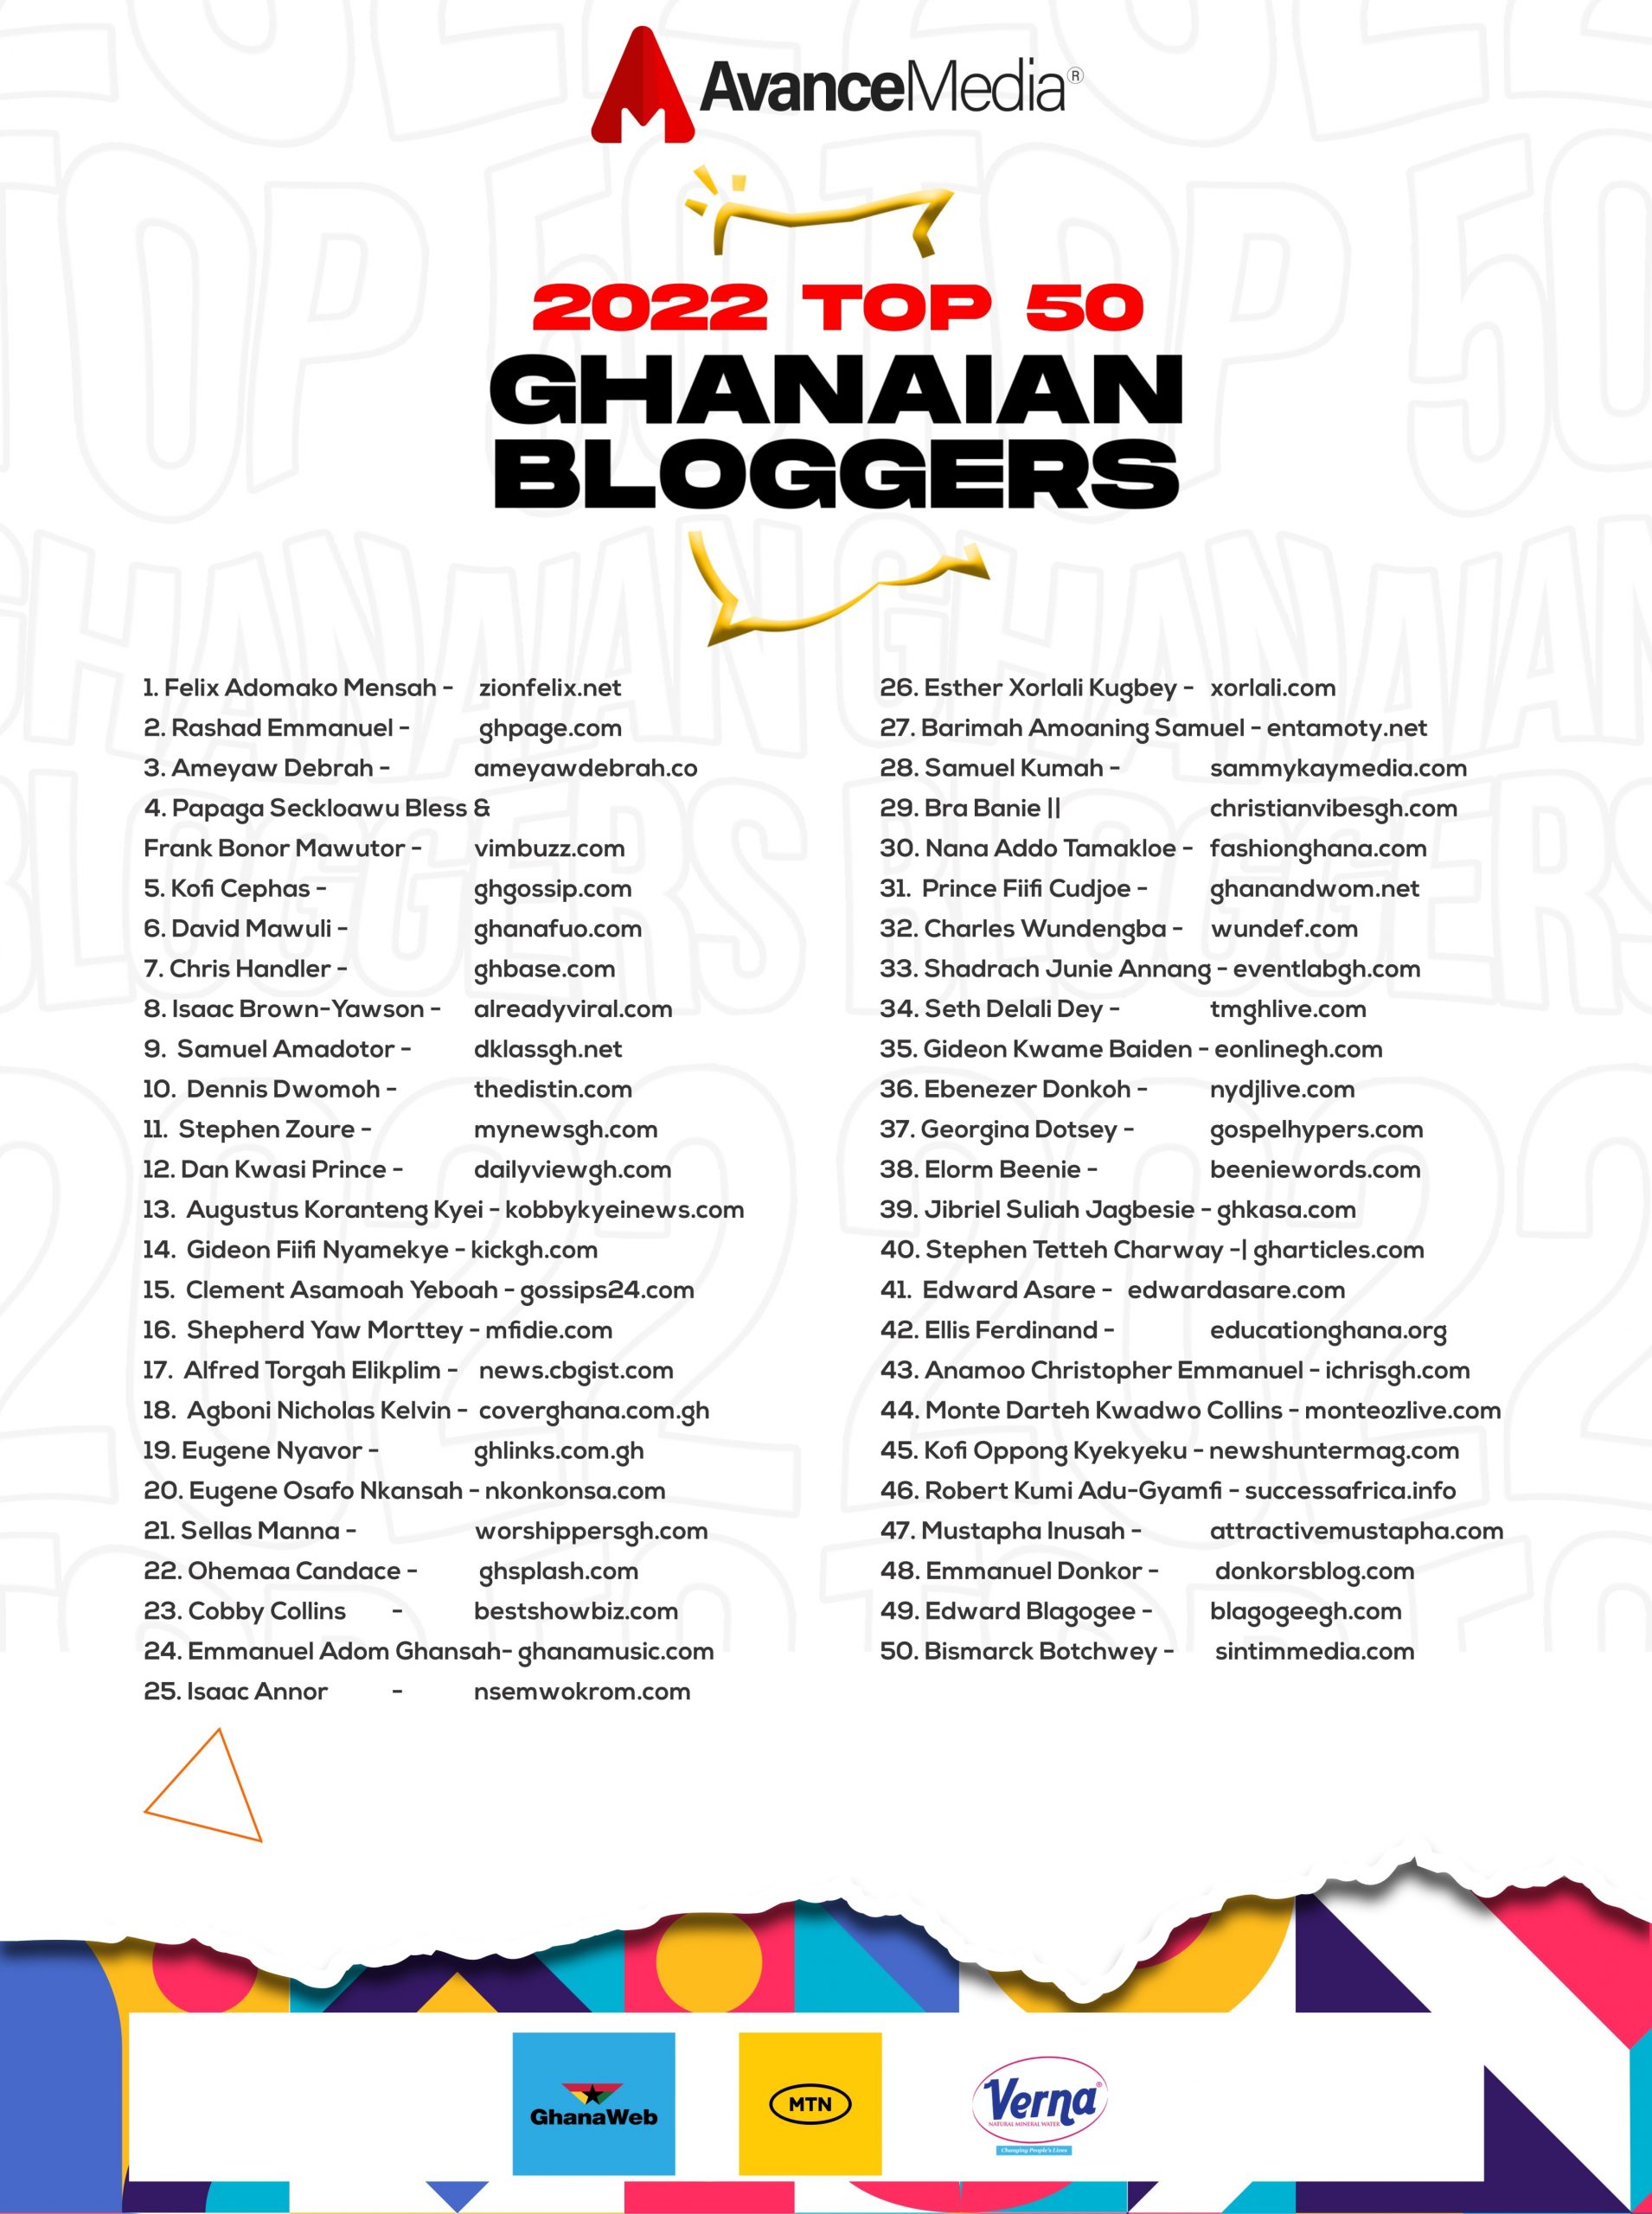 2022 List of Top 50 Ghanaian Bloggers scaled